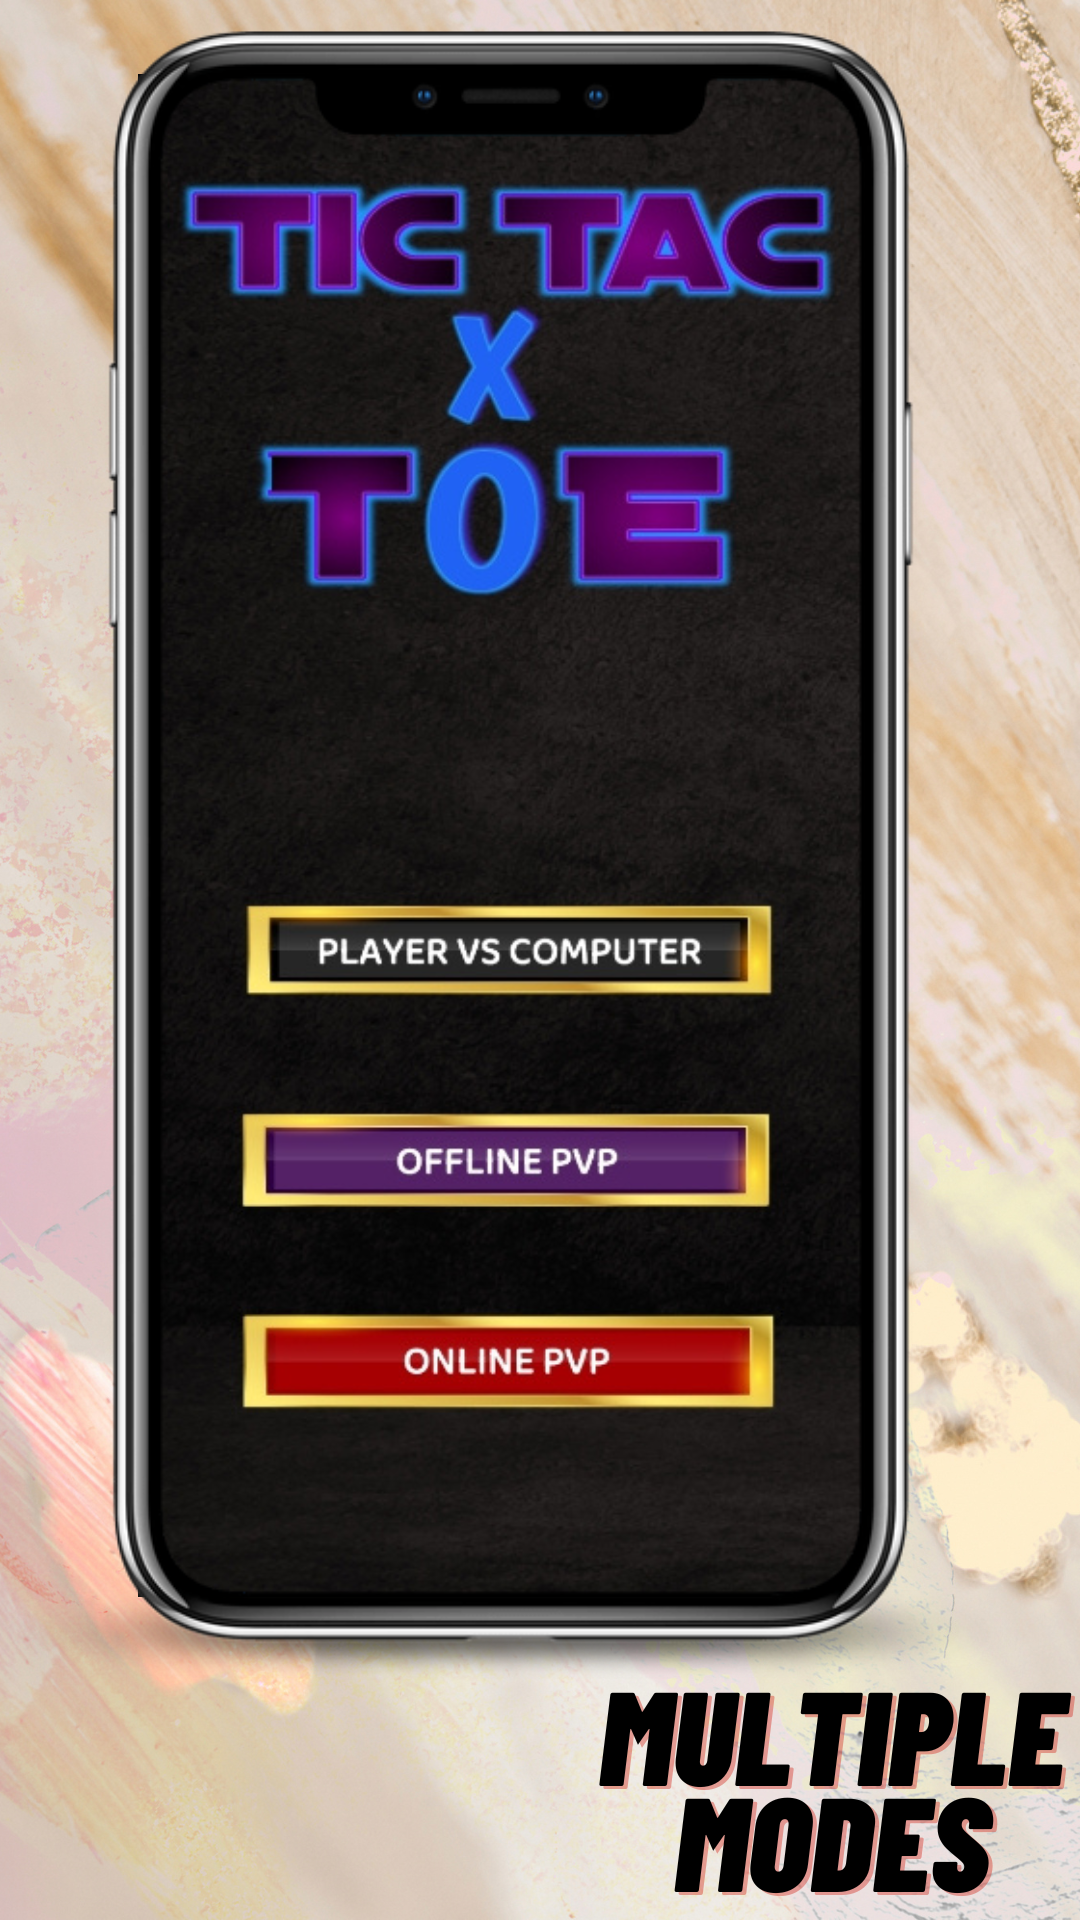 Play Tic Tac Toe Online with Friends or Family - APK Download for